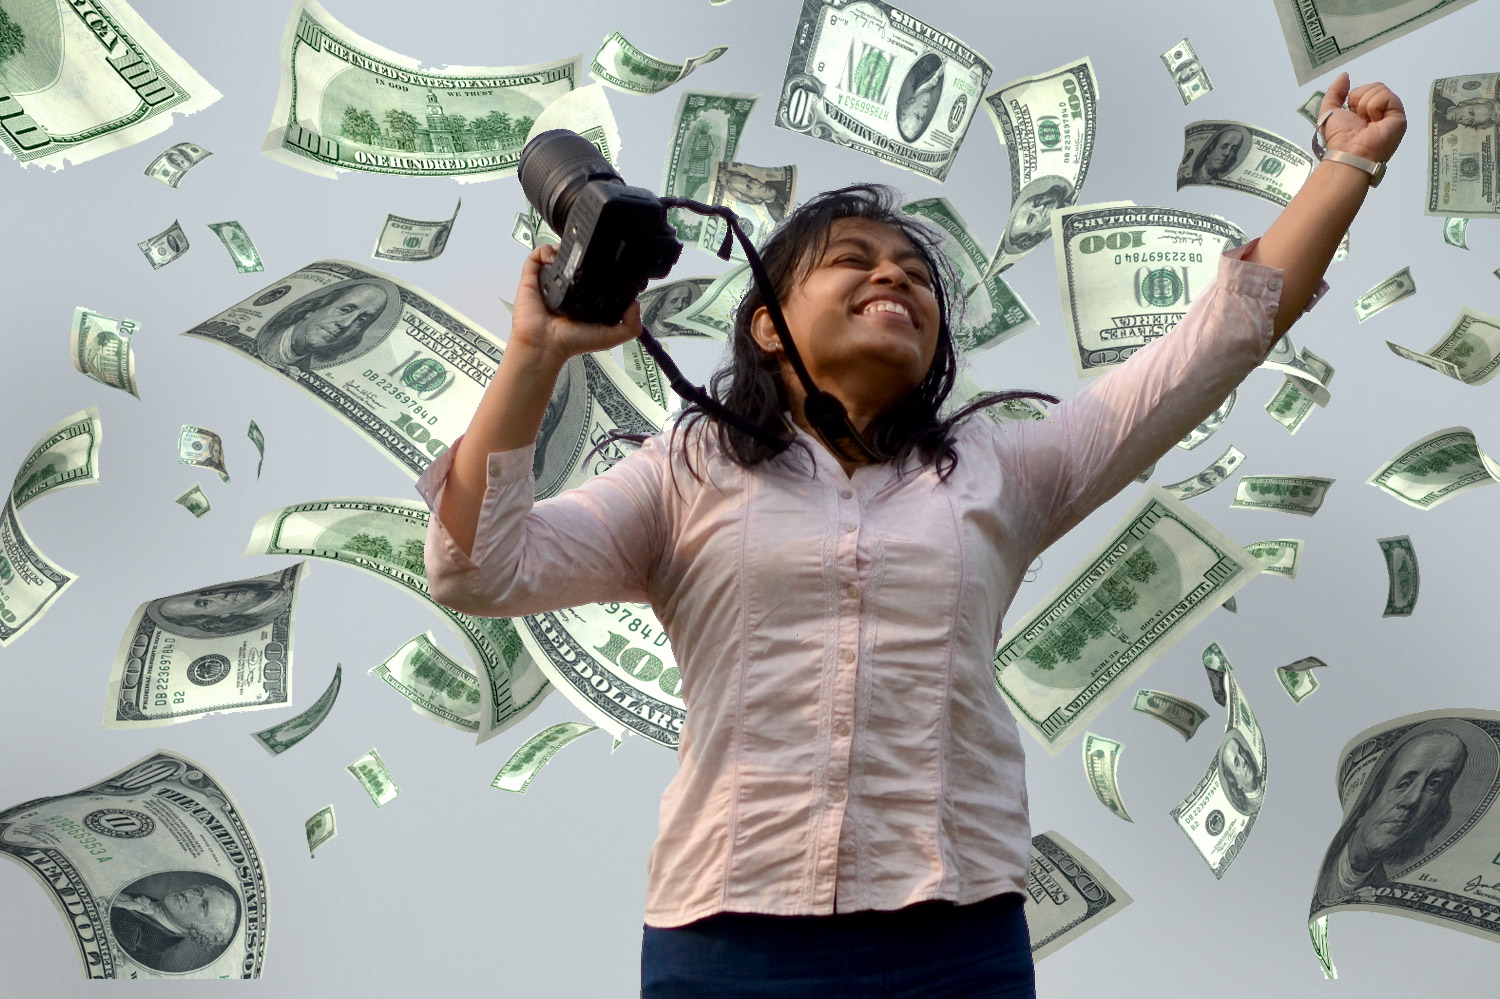 15 ways to make money with photography